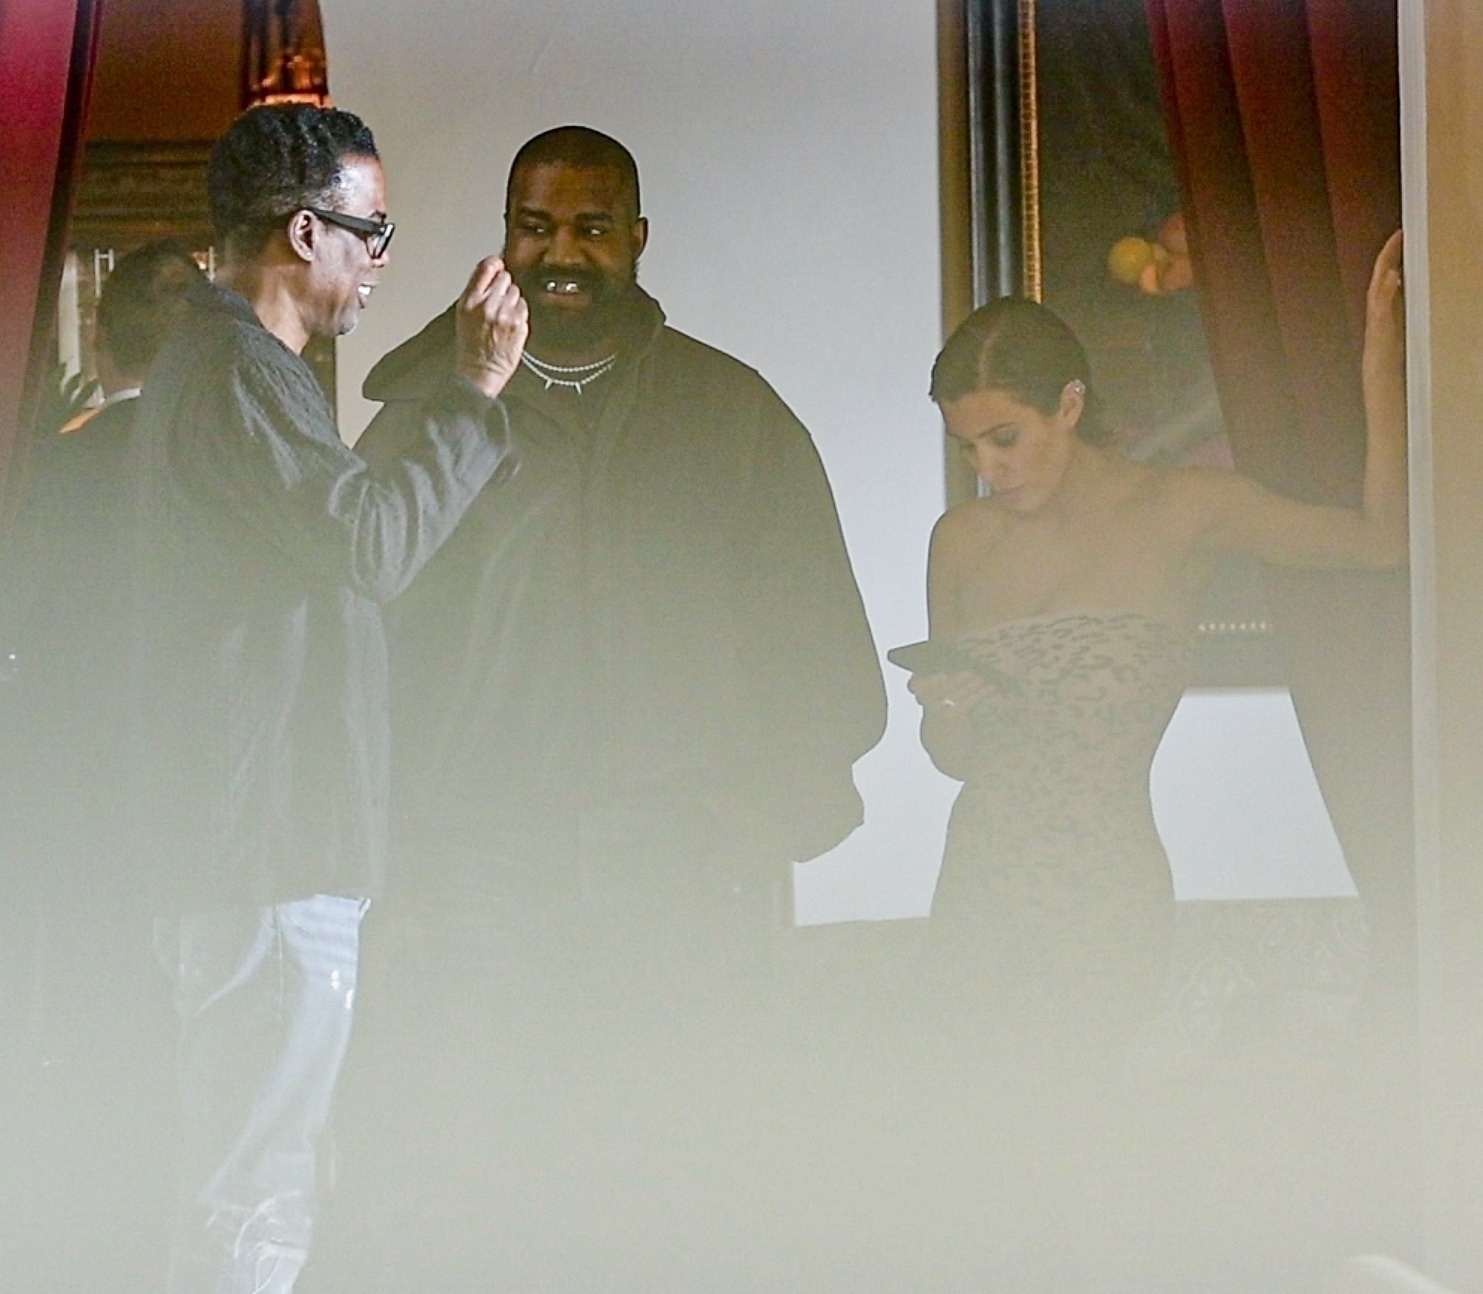 Contrary to current rumors, Kanye did not have his teeth removed, according to a source